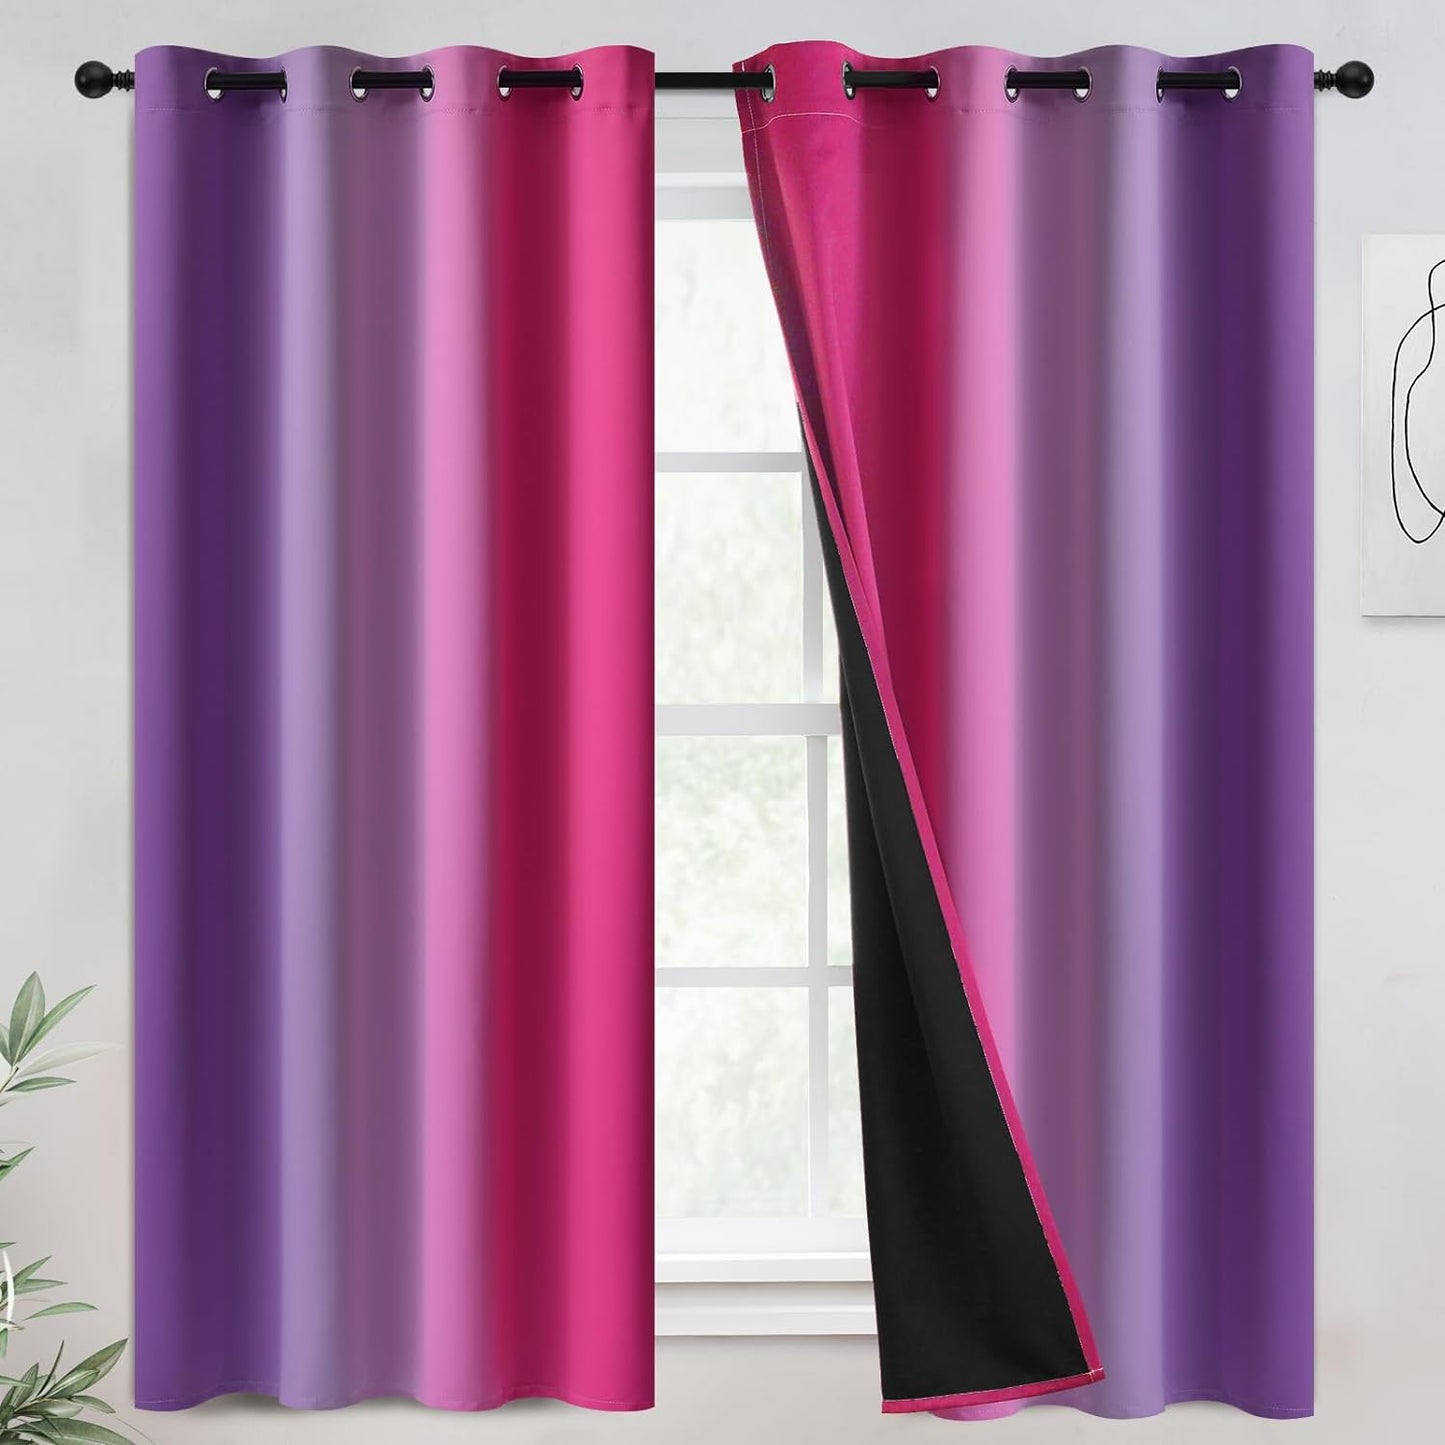 COSVIYA 100% Blackout Curtains & Drapes Ombre Purple Curtains 63 Inch Length 2 Panels,Full Room Darkening Grommet Gradient Insulated Thermal Window Curtains for Bedroom/Living Room,52X63 Inches  COSVIYA Blackout Pink And Purple 52W X 63L 